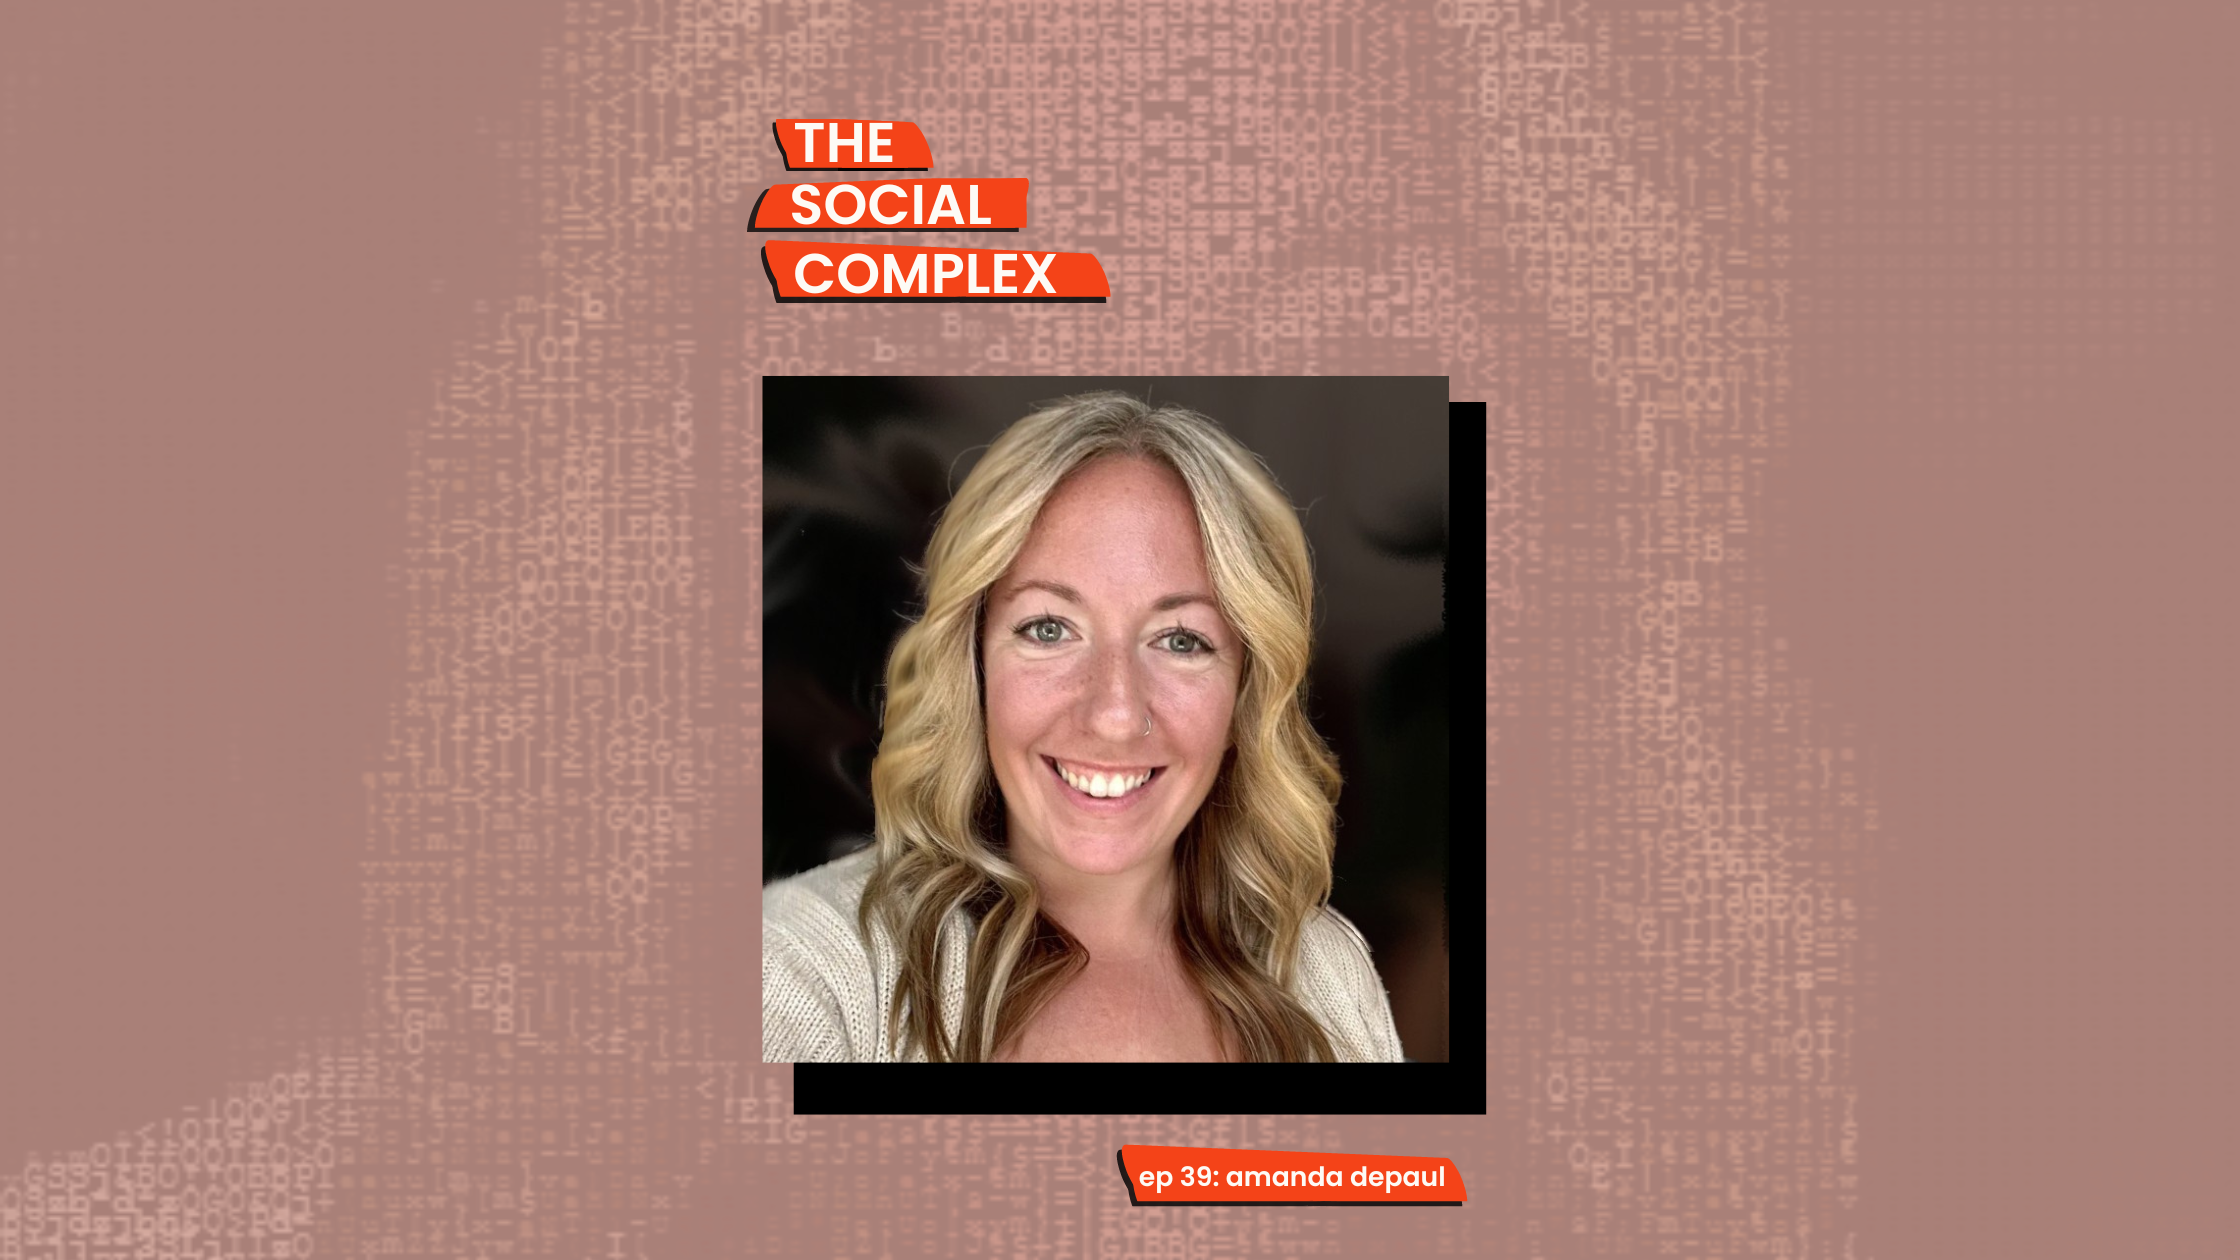 episode of the social complex podcsat with Amanda DePaul about demand generation marketing